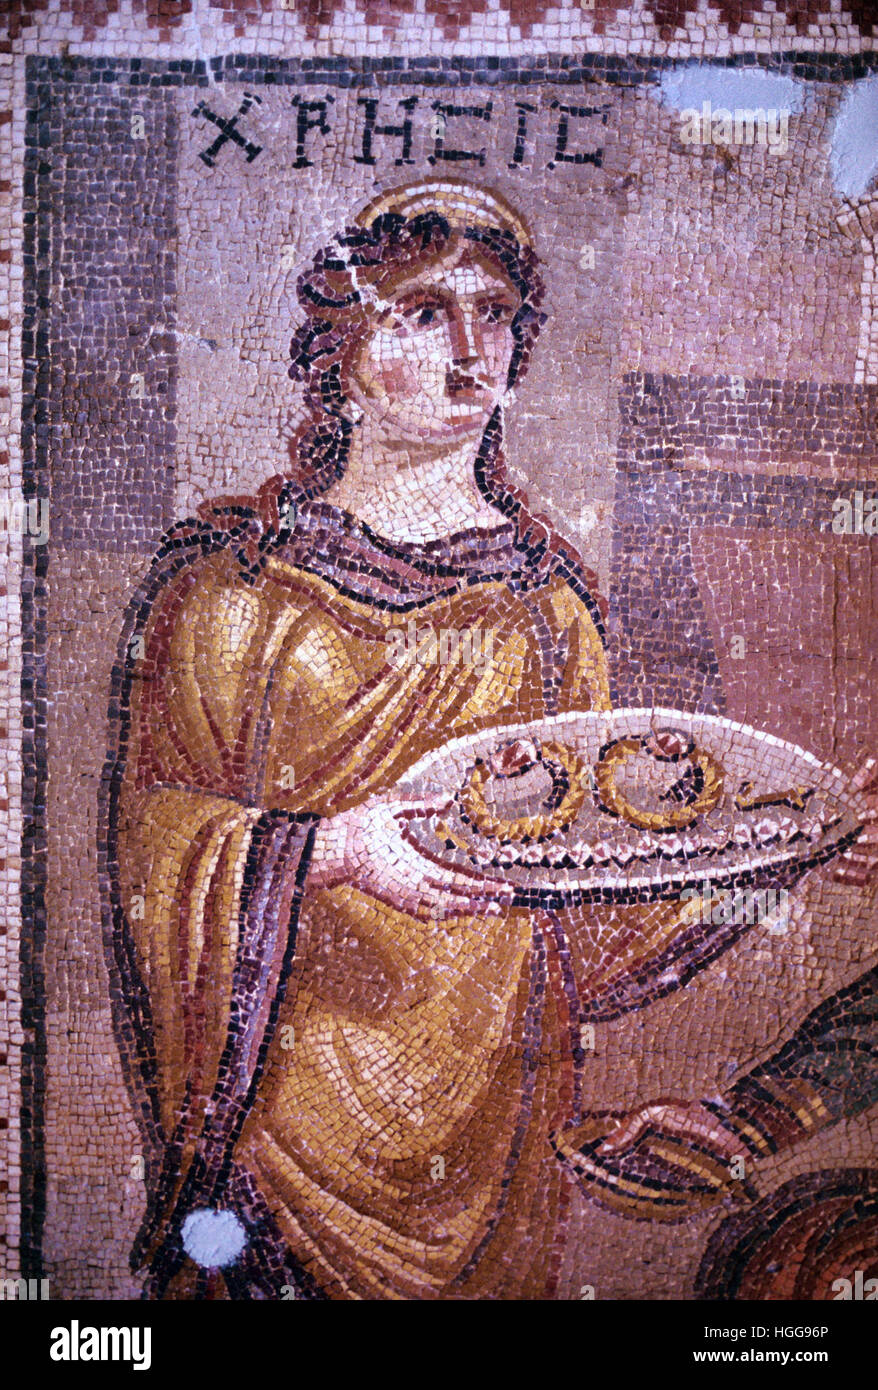 A Prisoner of Agamemnon, Chresis, Wearing a Toga Offers Her Ransom on a Tray in a c4th Roman Mosaic discovered at Harbiye, formerly Daphne, in Turkey. The Mosaic is Displayed in the Hatay Archaeological Museum, Antakya, Turkey Stock Photo